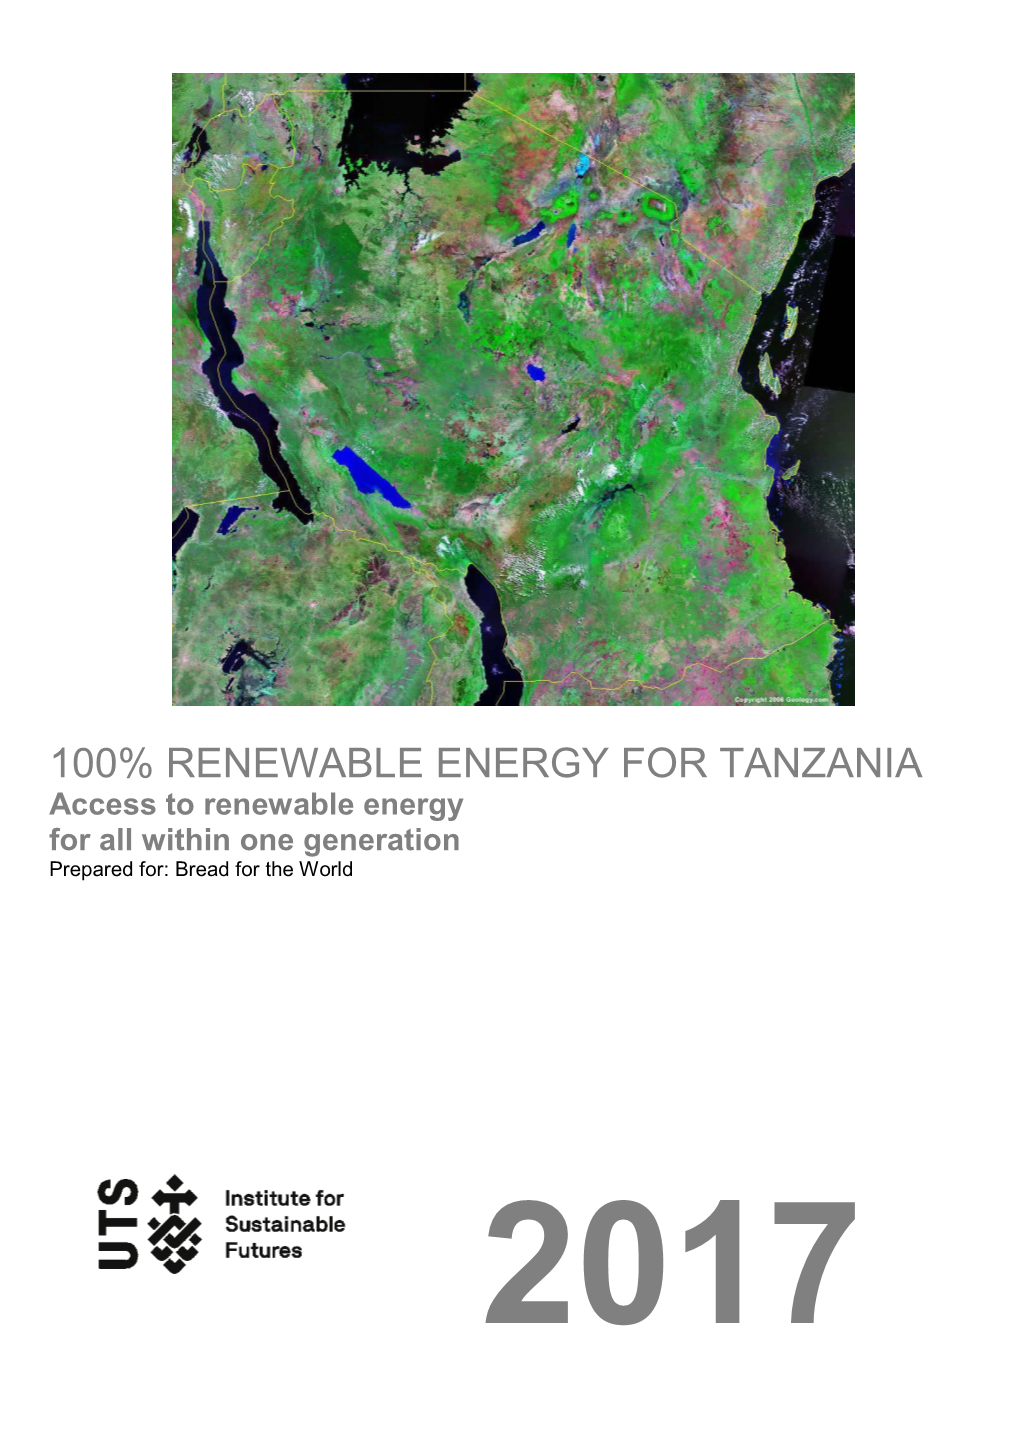 100% RENEWABLE ENERGY for TANZANIA Access to Renewable Energy for All Within One Generation Prepared For: Bread for the World